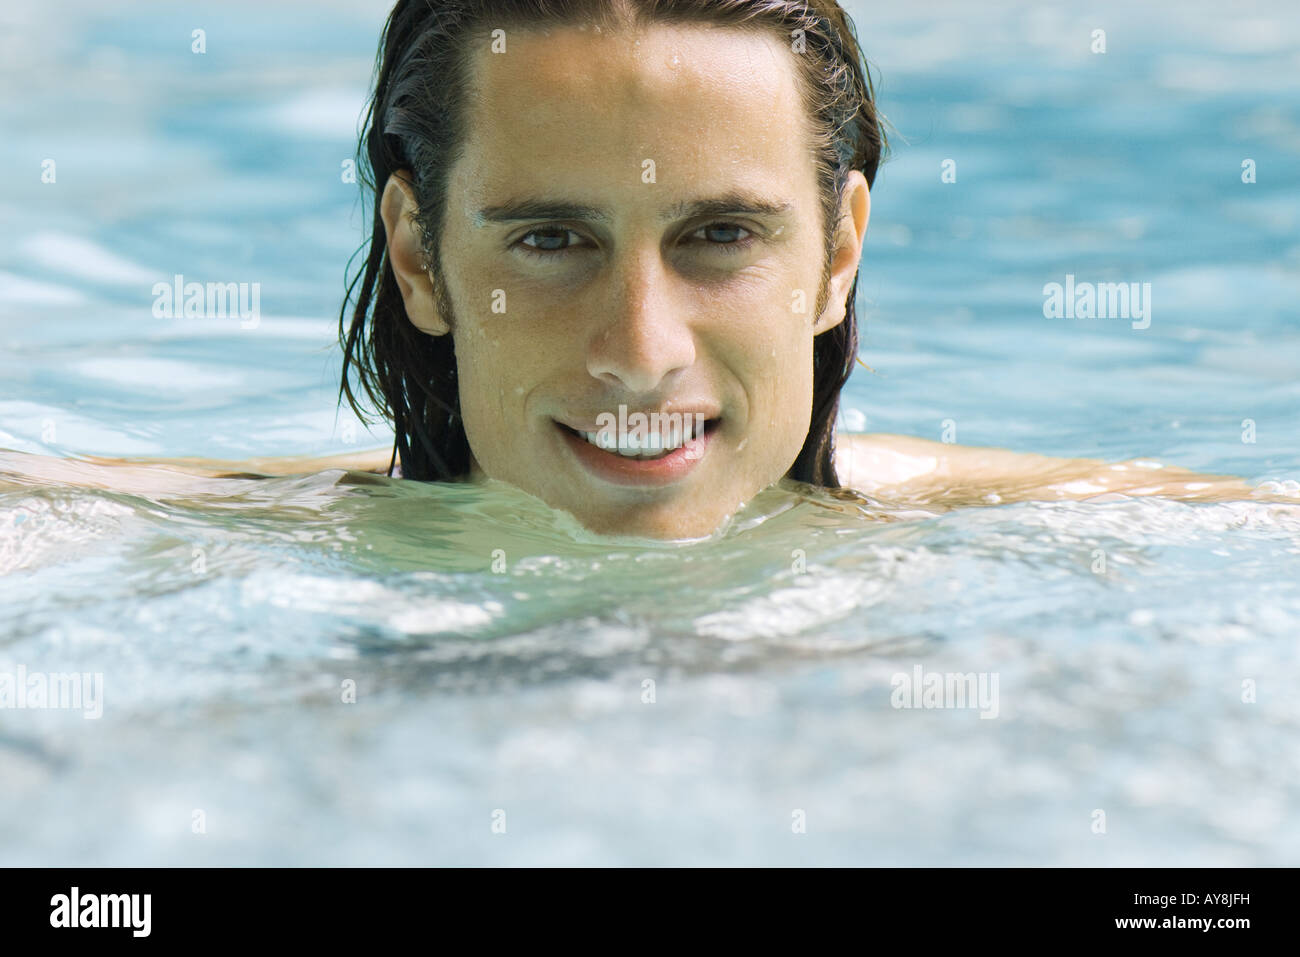 Man in swimming pool, smiling at camera, portrait Stock Photo